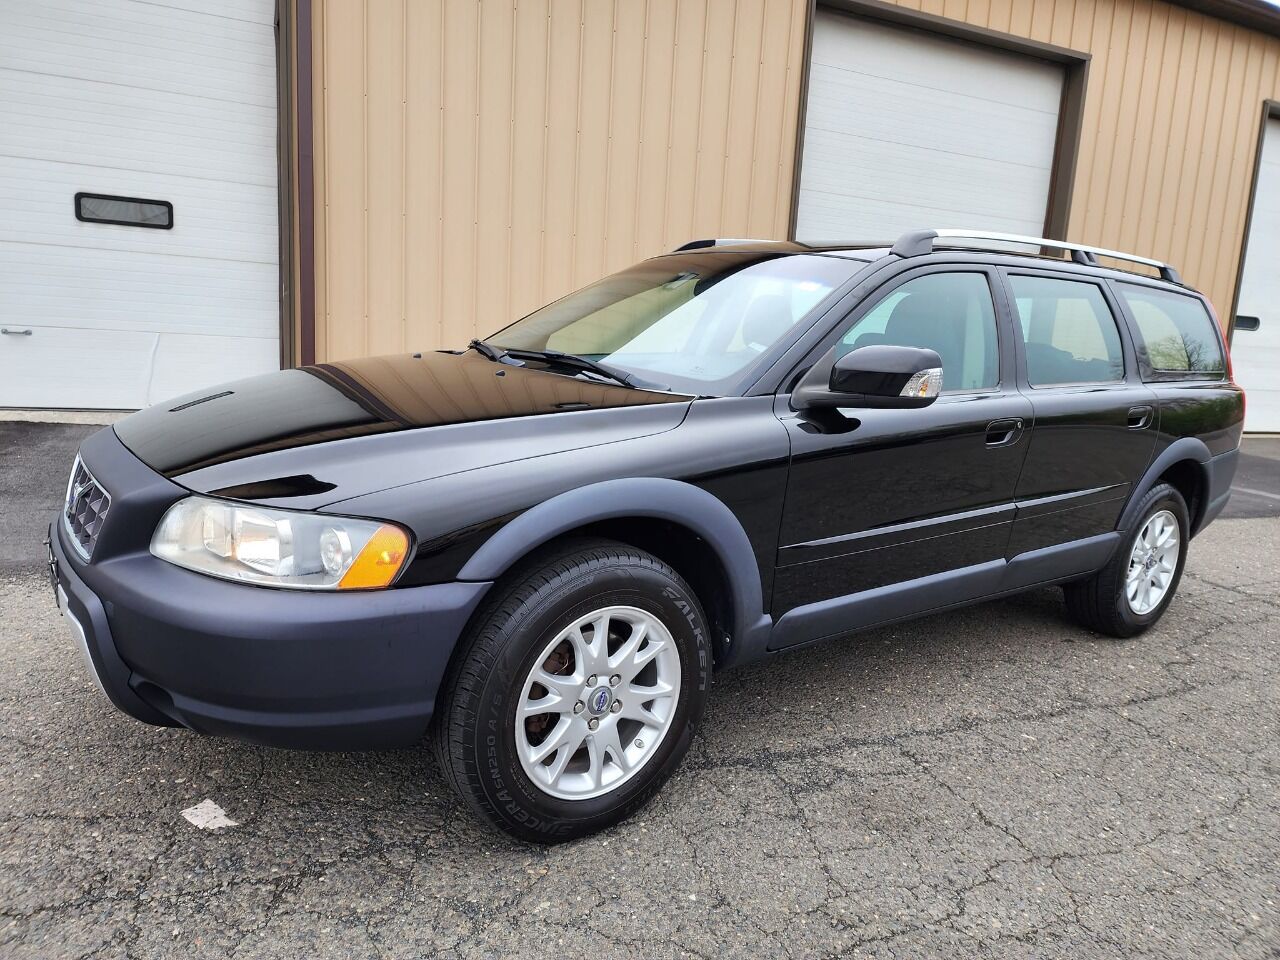 2007 Volvo XC70 For Sale - Carsforsale.com®